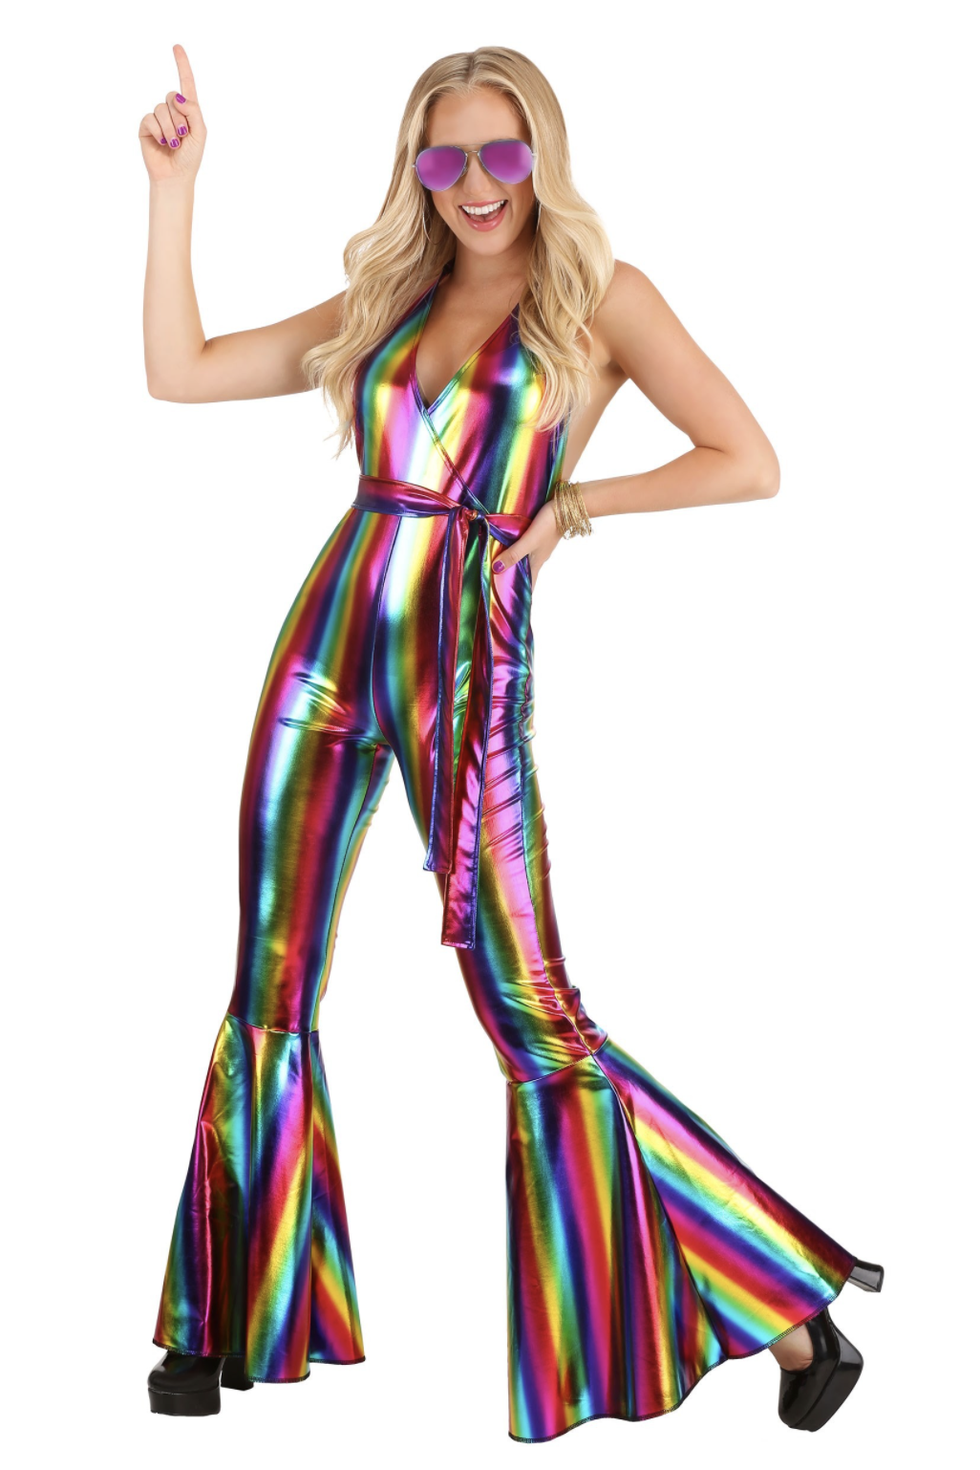 37 Best '70s Halloween Costumes - Easy '70s Party Costume Ideas